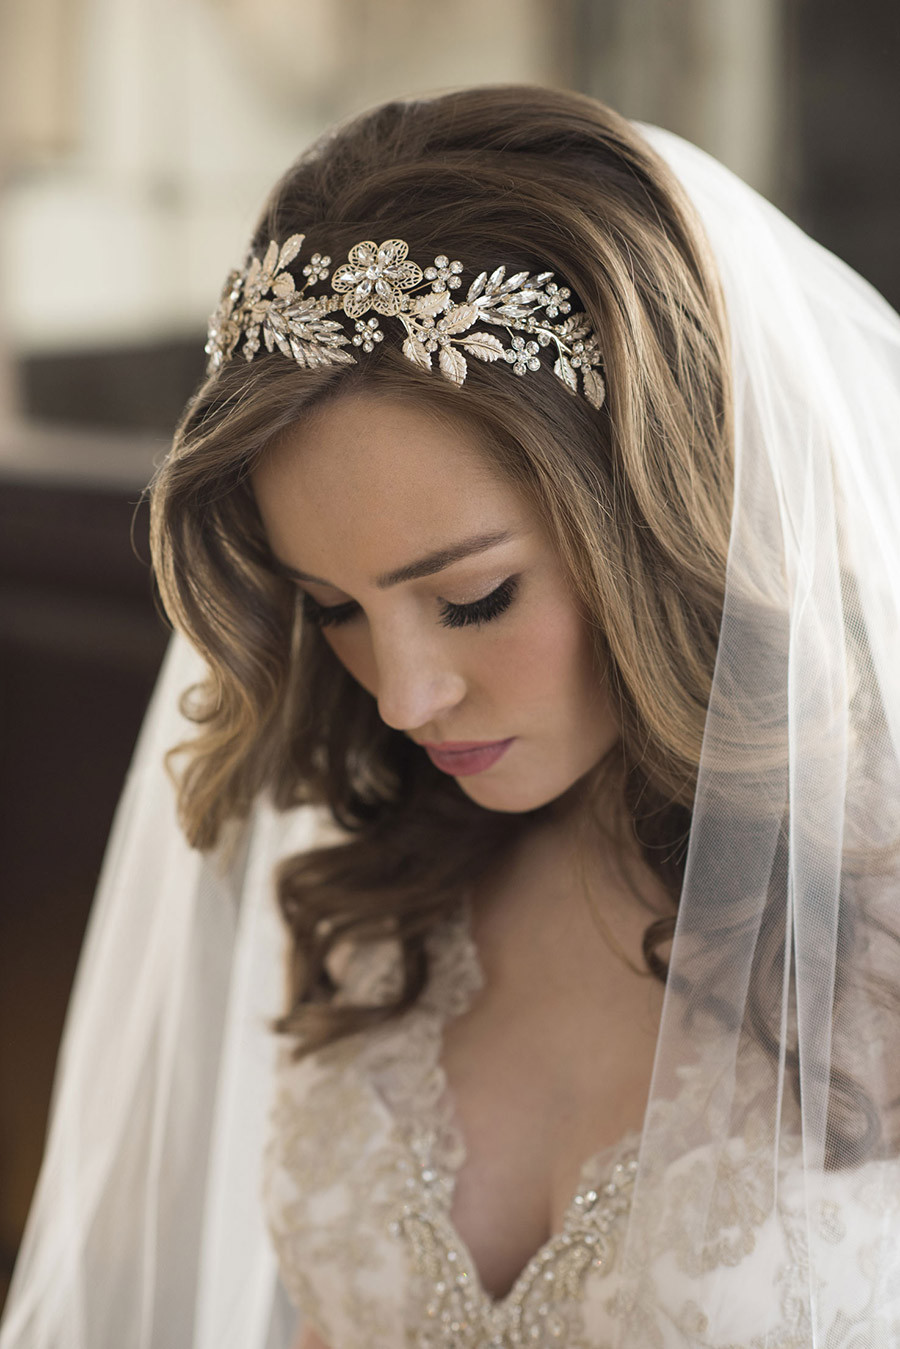 Wedding Hairstyles With Headband
 Bel Aire Bridal Accessories — A Dazzling Finishing Touch